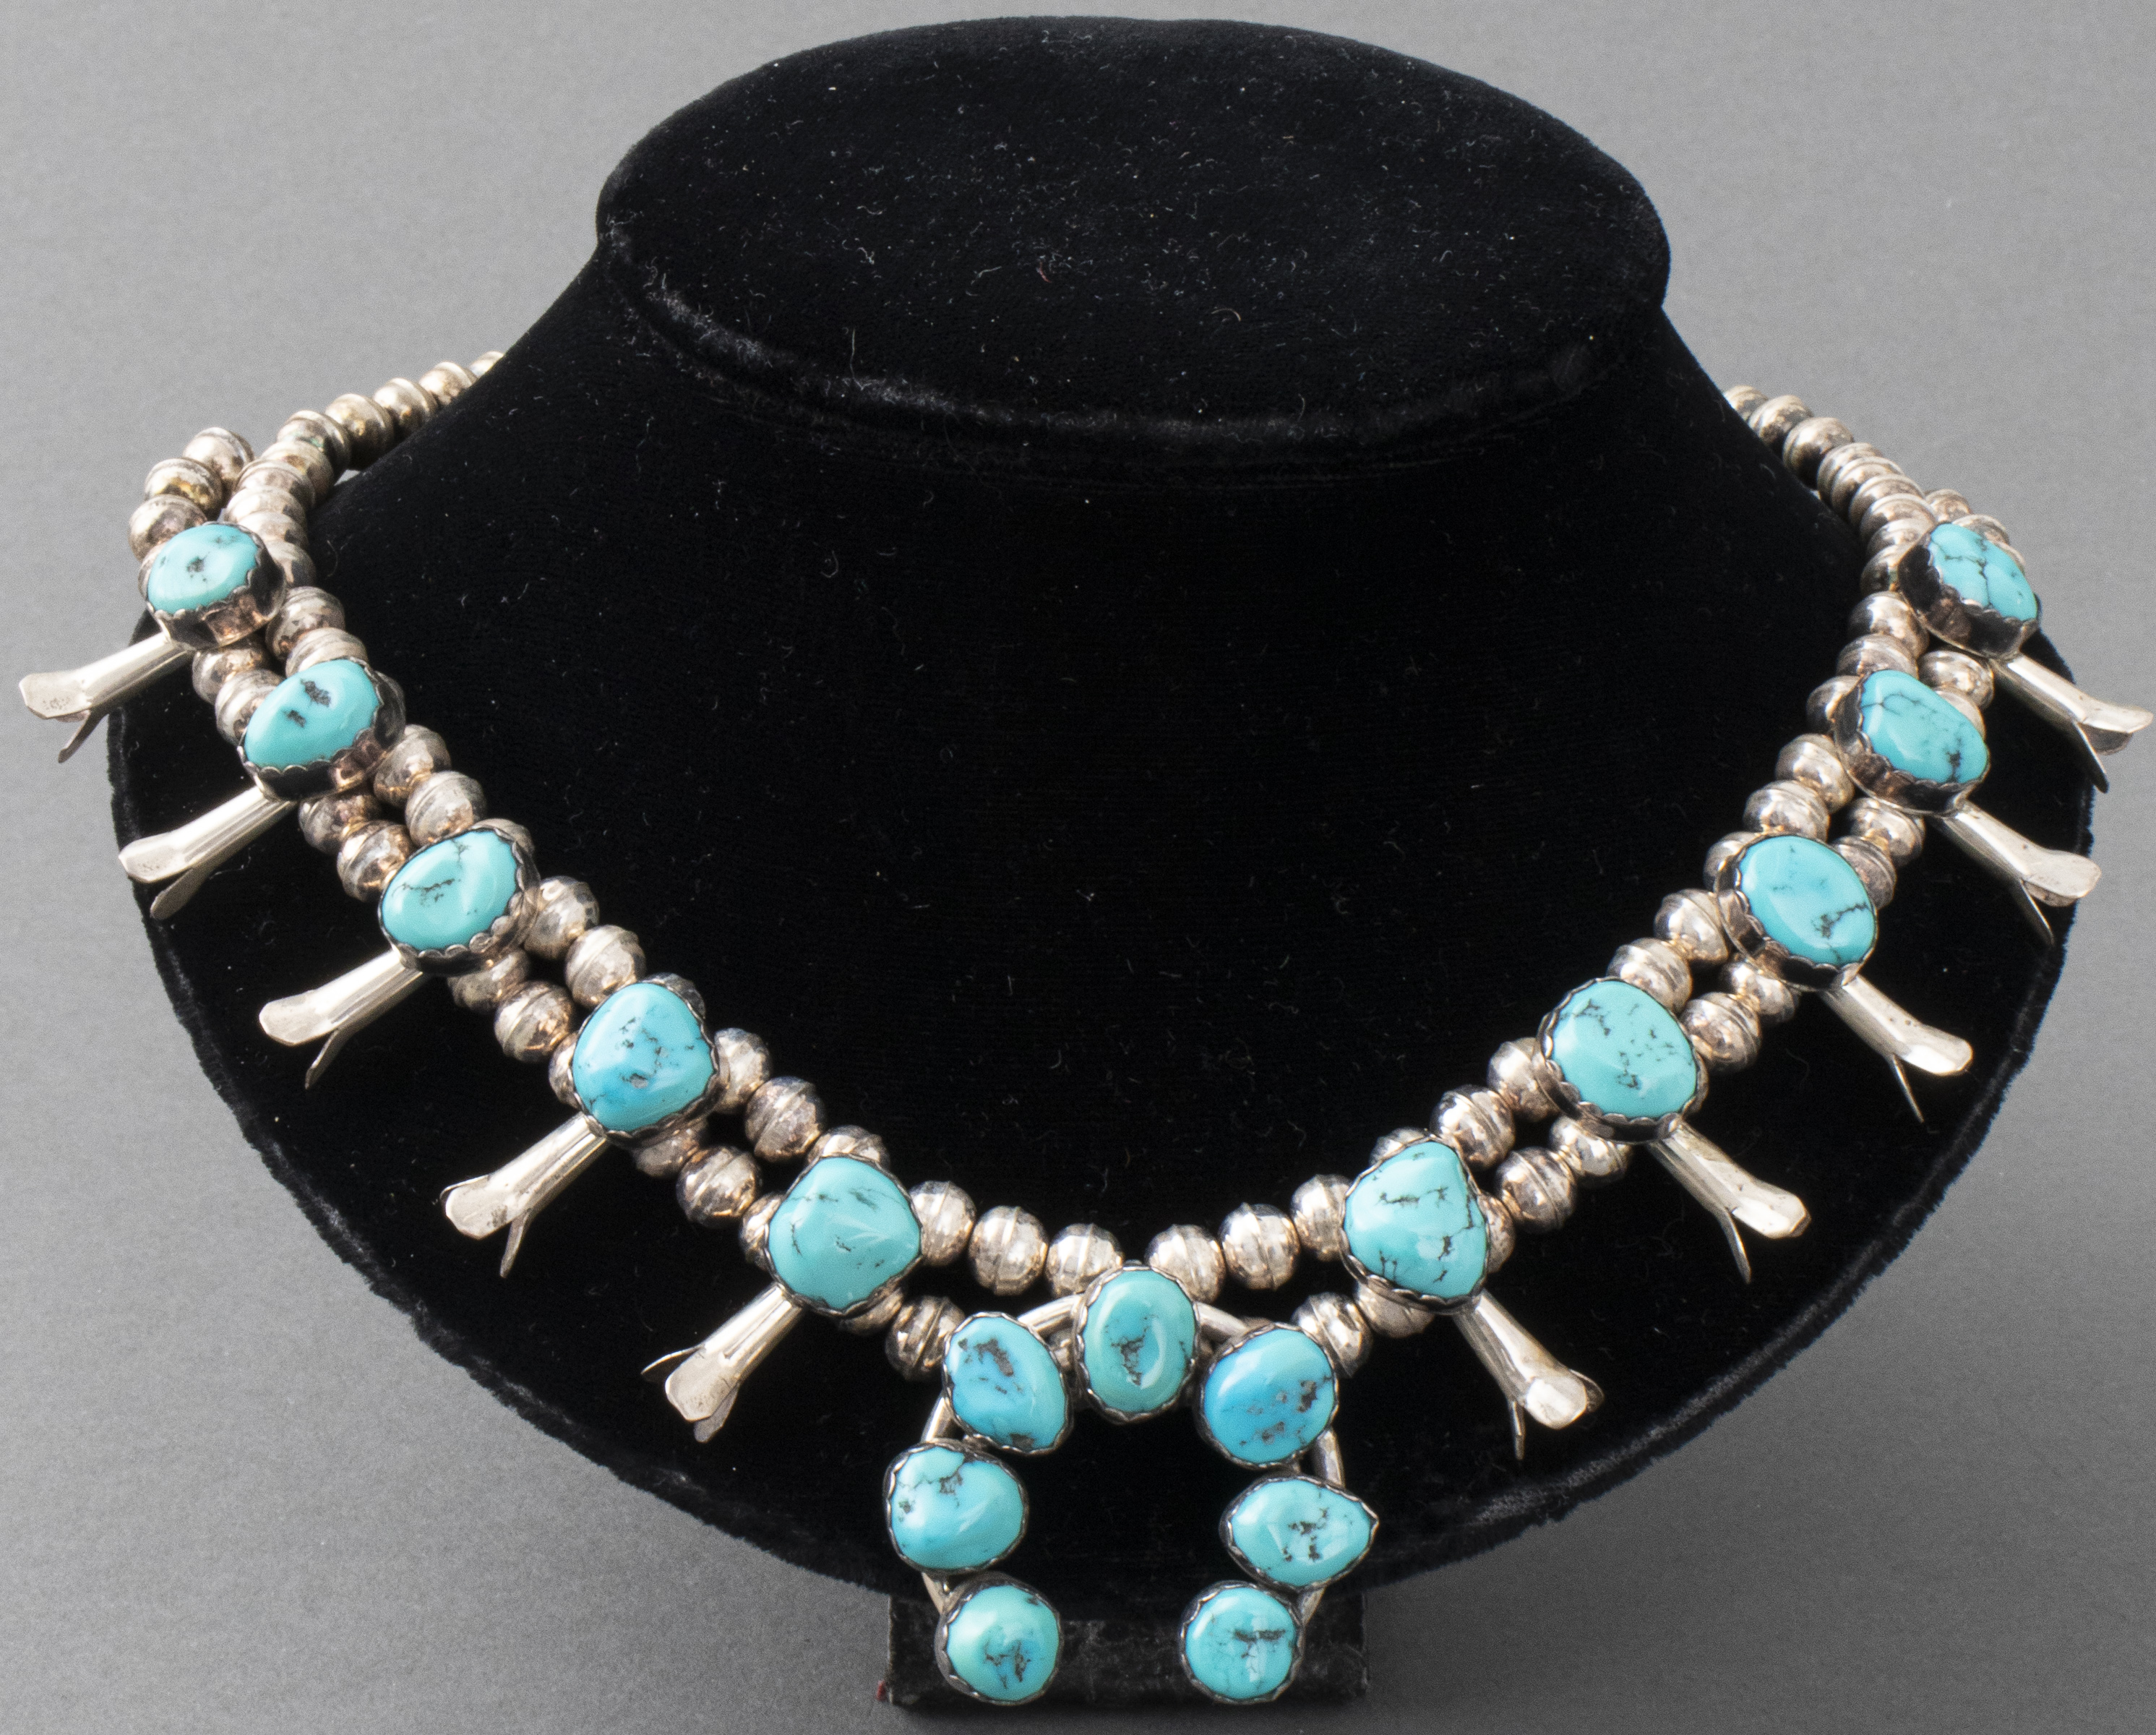 AMERICAN INDIAN SILVER & TURQUOISE